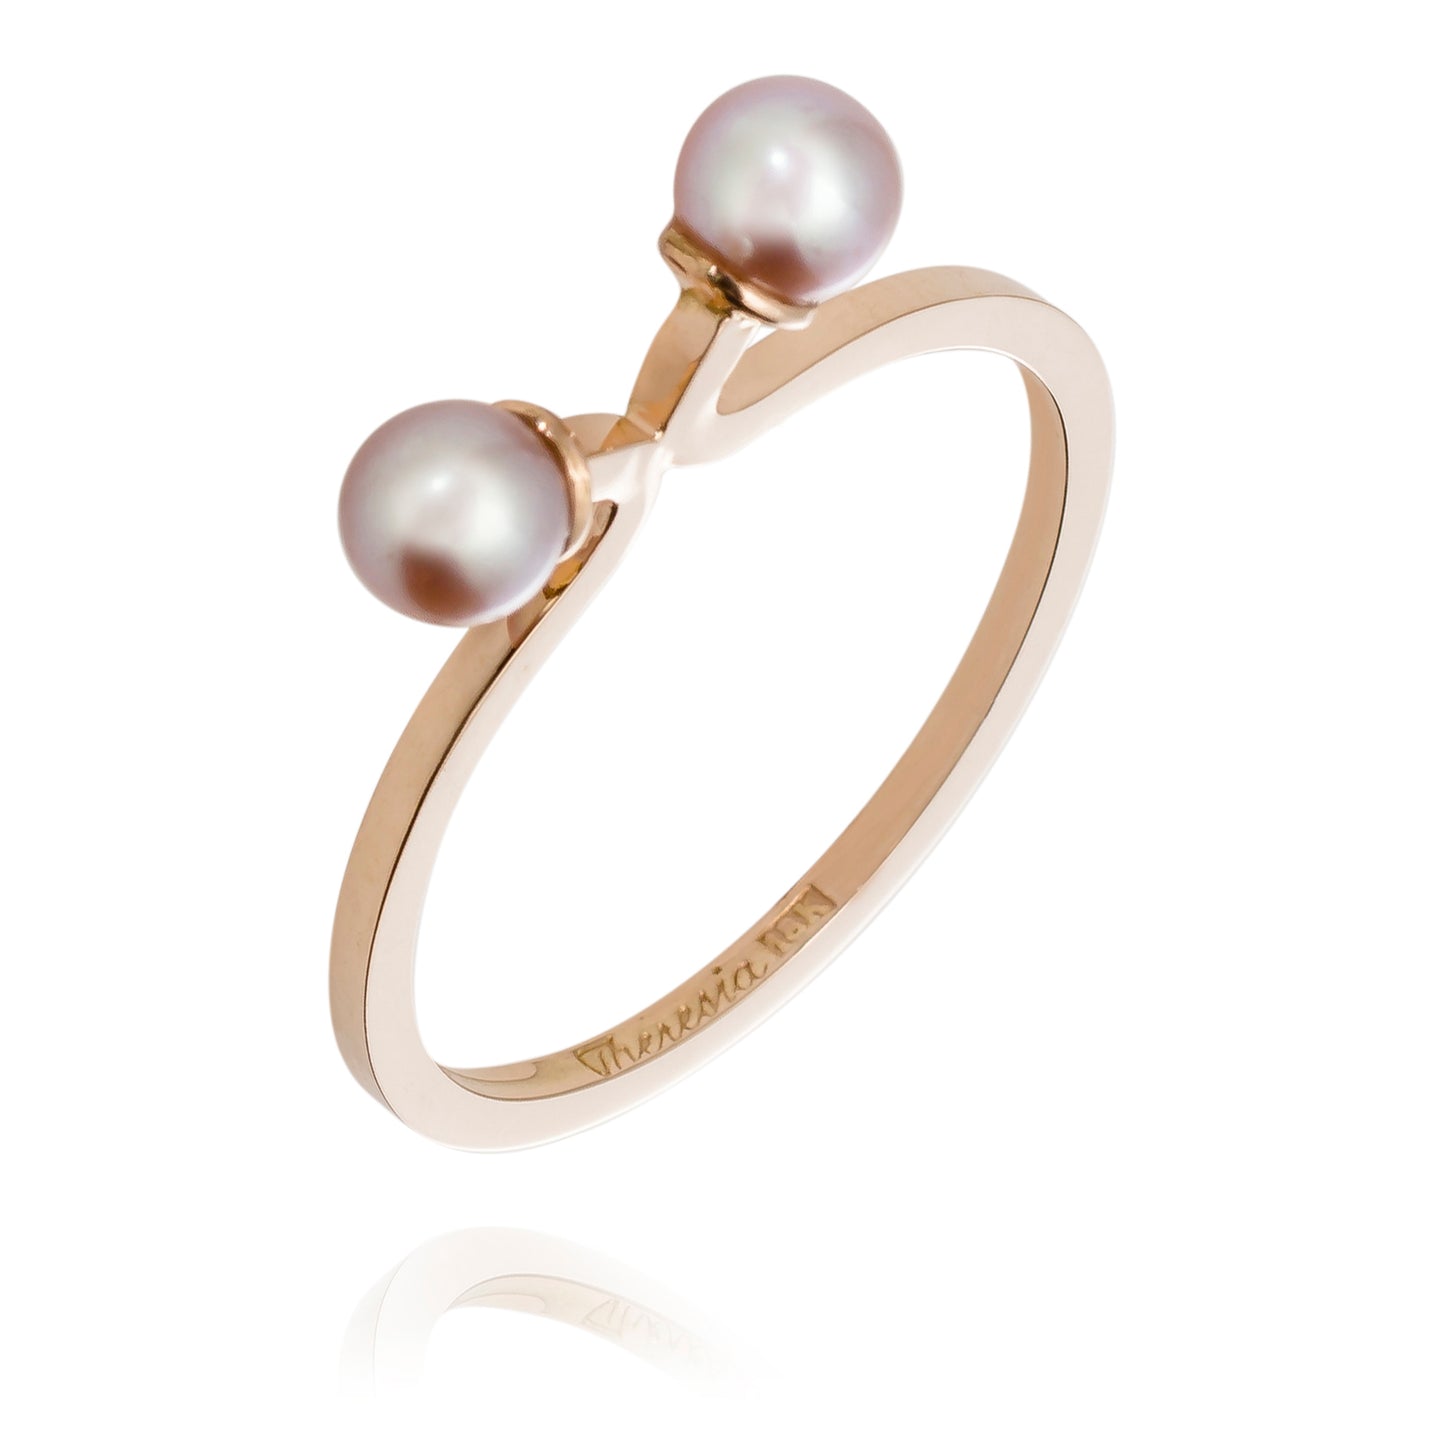 Tale about the ring 2 rings in gold, 1 white brilliants Twvvs 0.30ct 1 white pink pearl 1 pink opal 1 brilliant cut pink sapphires